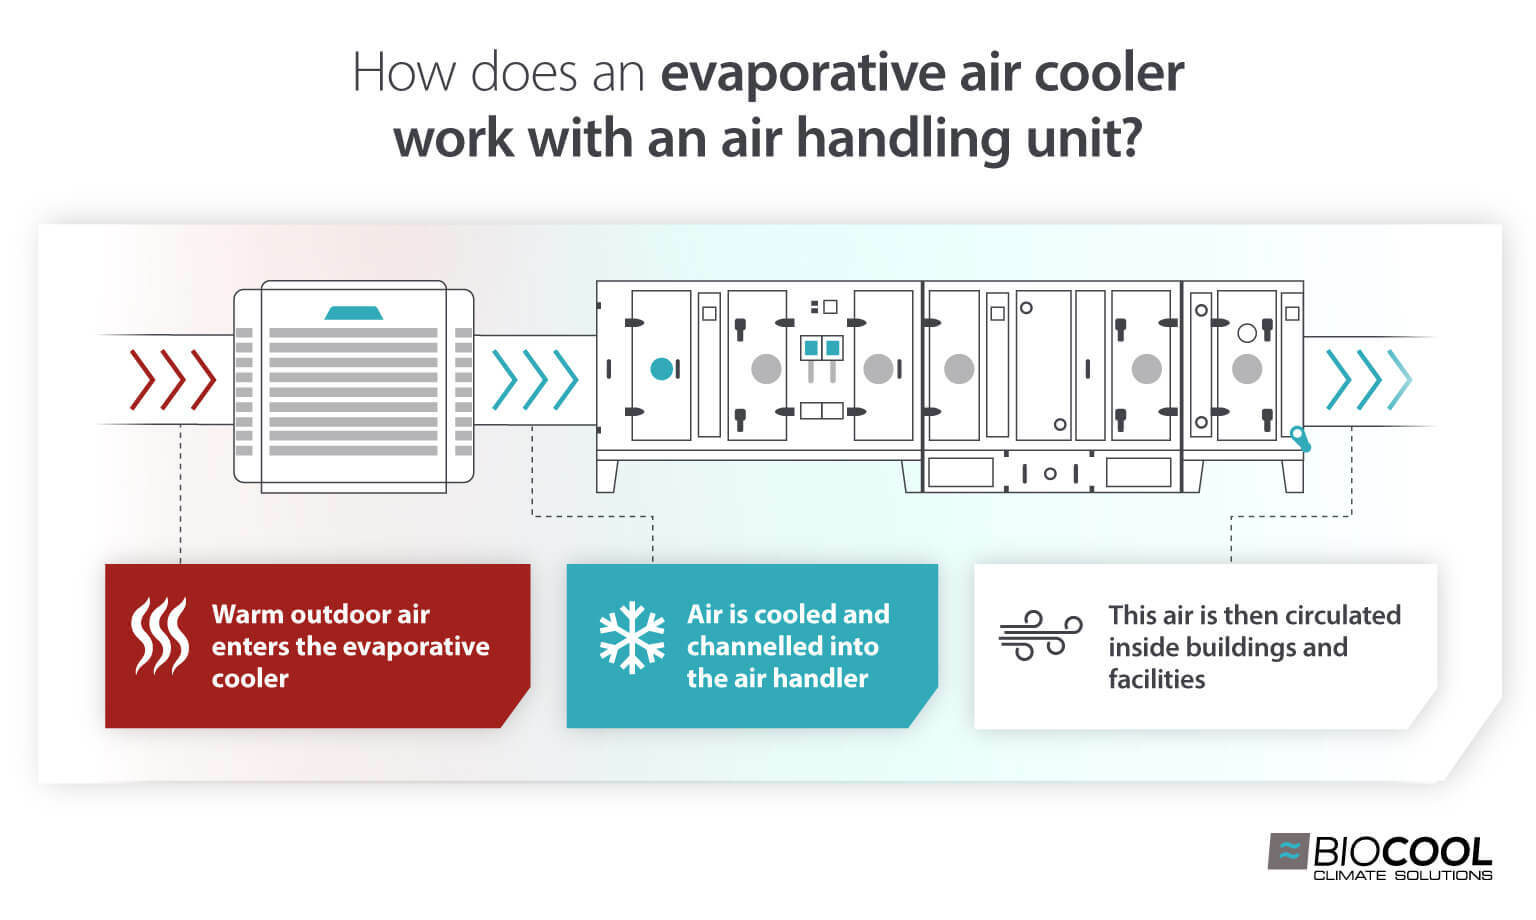 Infographic showing how evaporative coolers work with air handling units